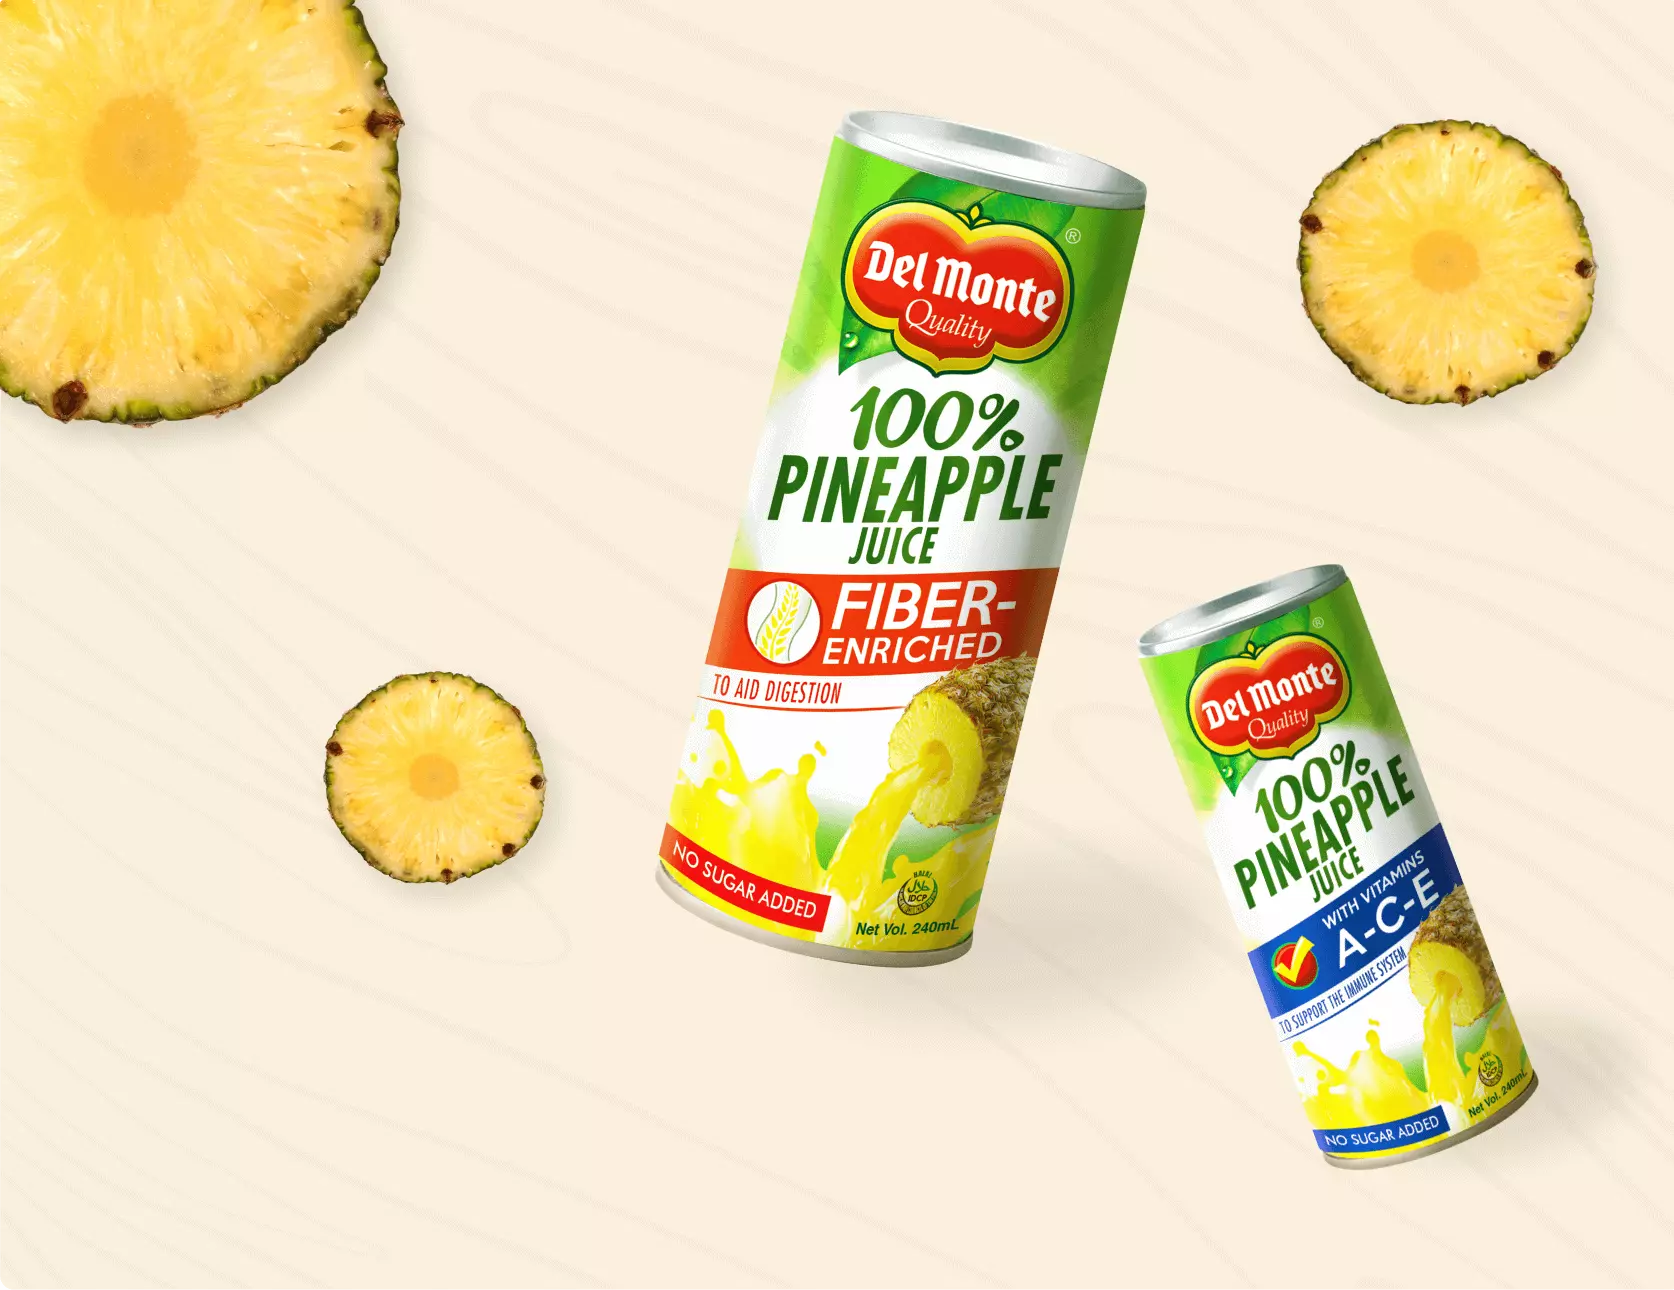 Del monte products